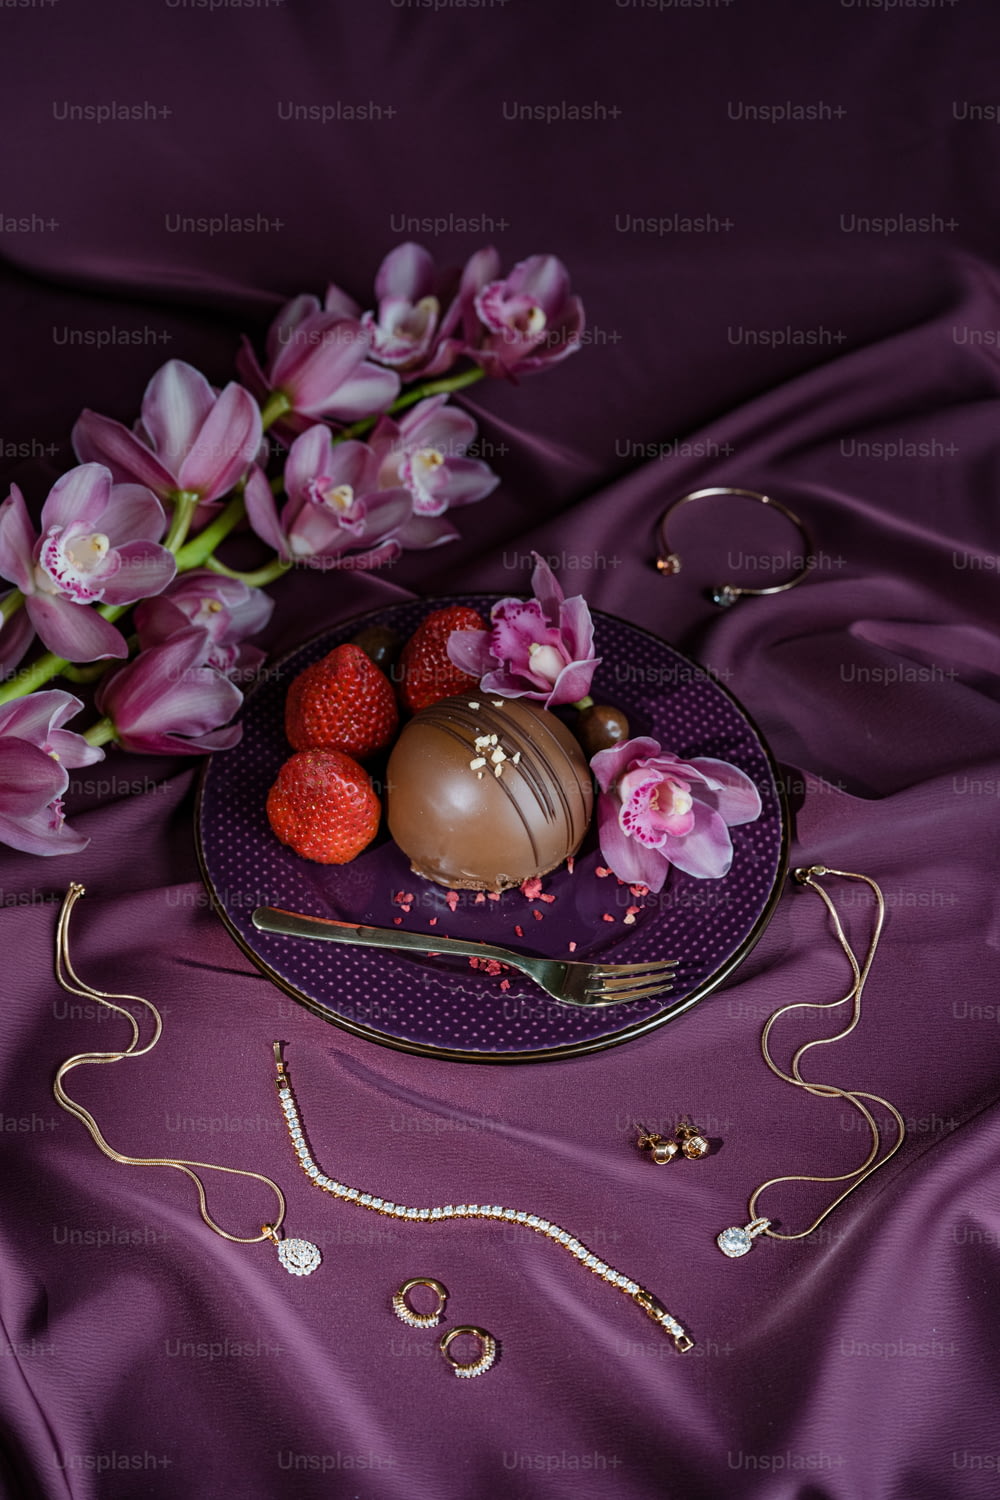 a plate of chocolates and flowers on a purple cloth